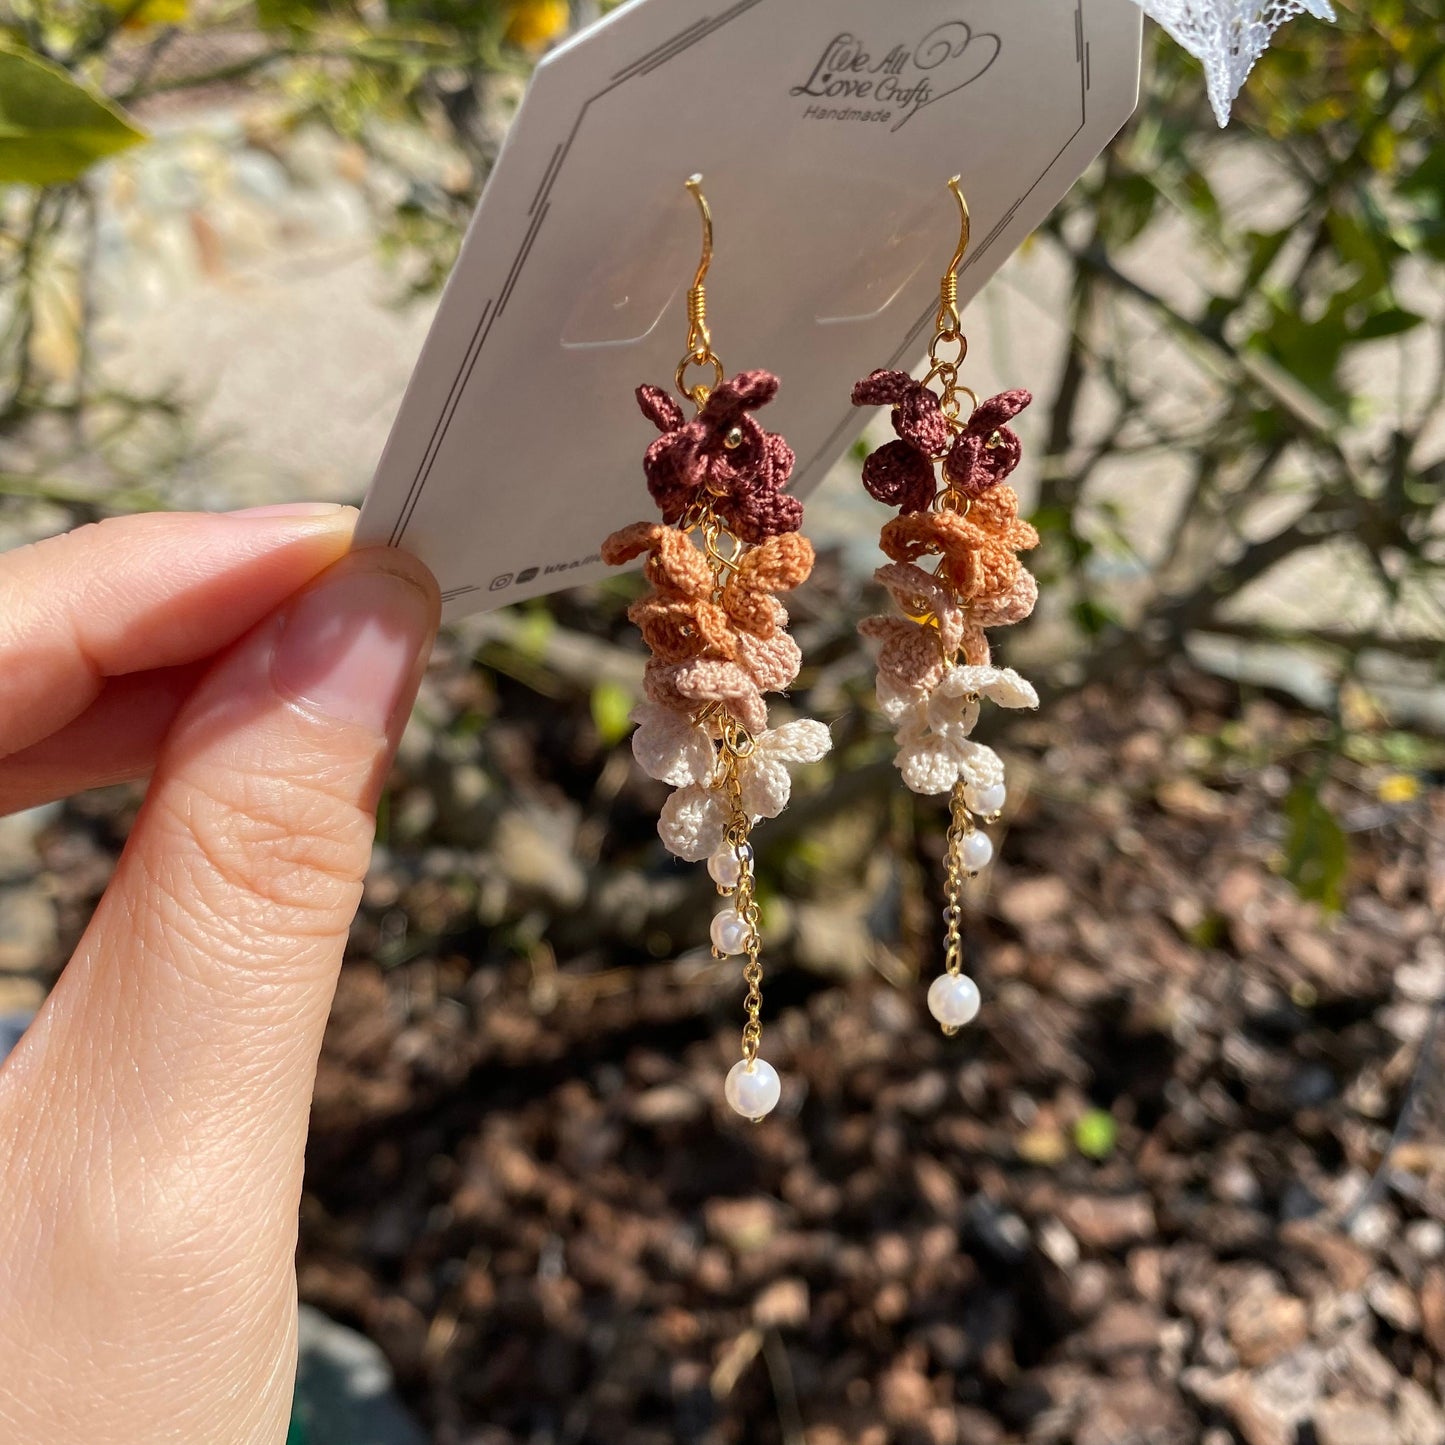 4 shades of Brown and Beige ombre flower cluster crochet dangle earrings/Microcrochet/14k gold/gift for her/Knitting handmade jewelry